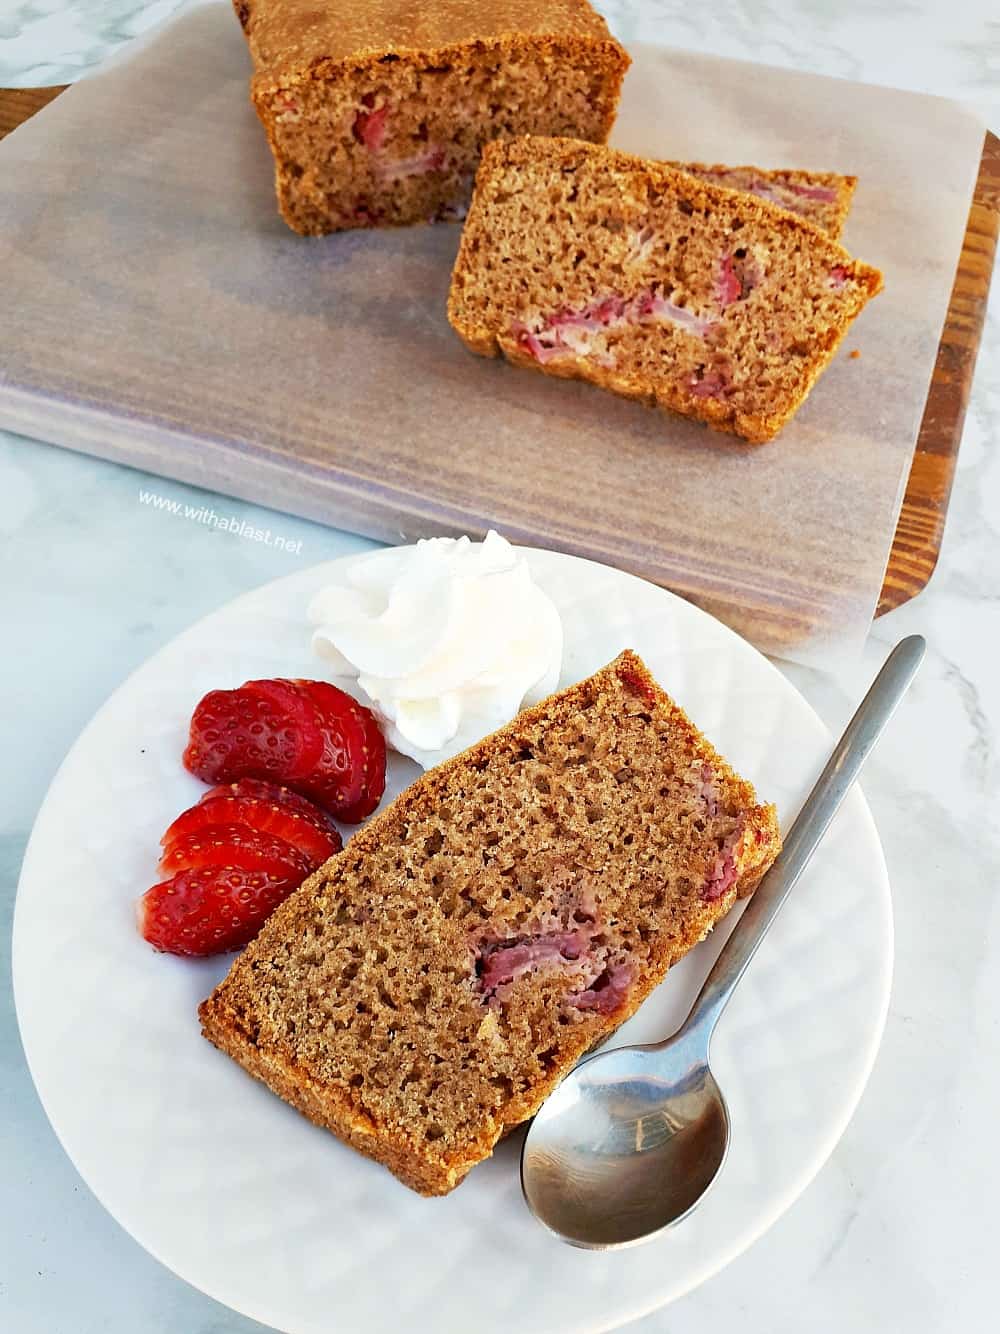 Strawberry Cinnamon Bread is always a hit for dessert or as a tea time treat - soft, moist and so fruity ! Quick, easy everyday pantry ingredients